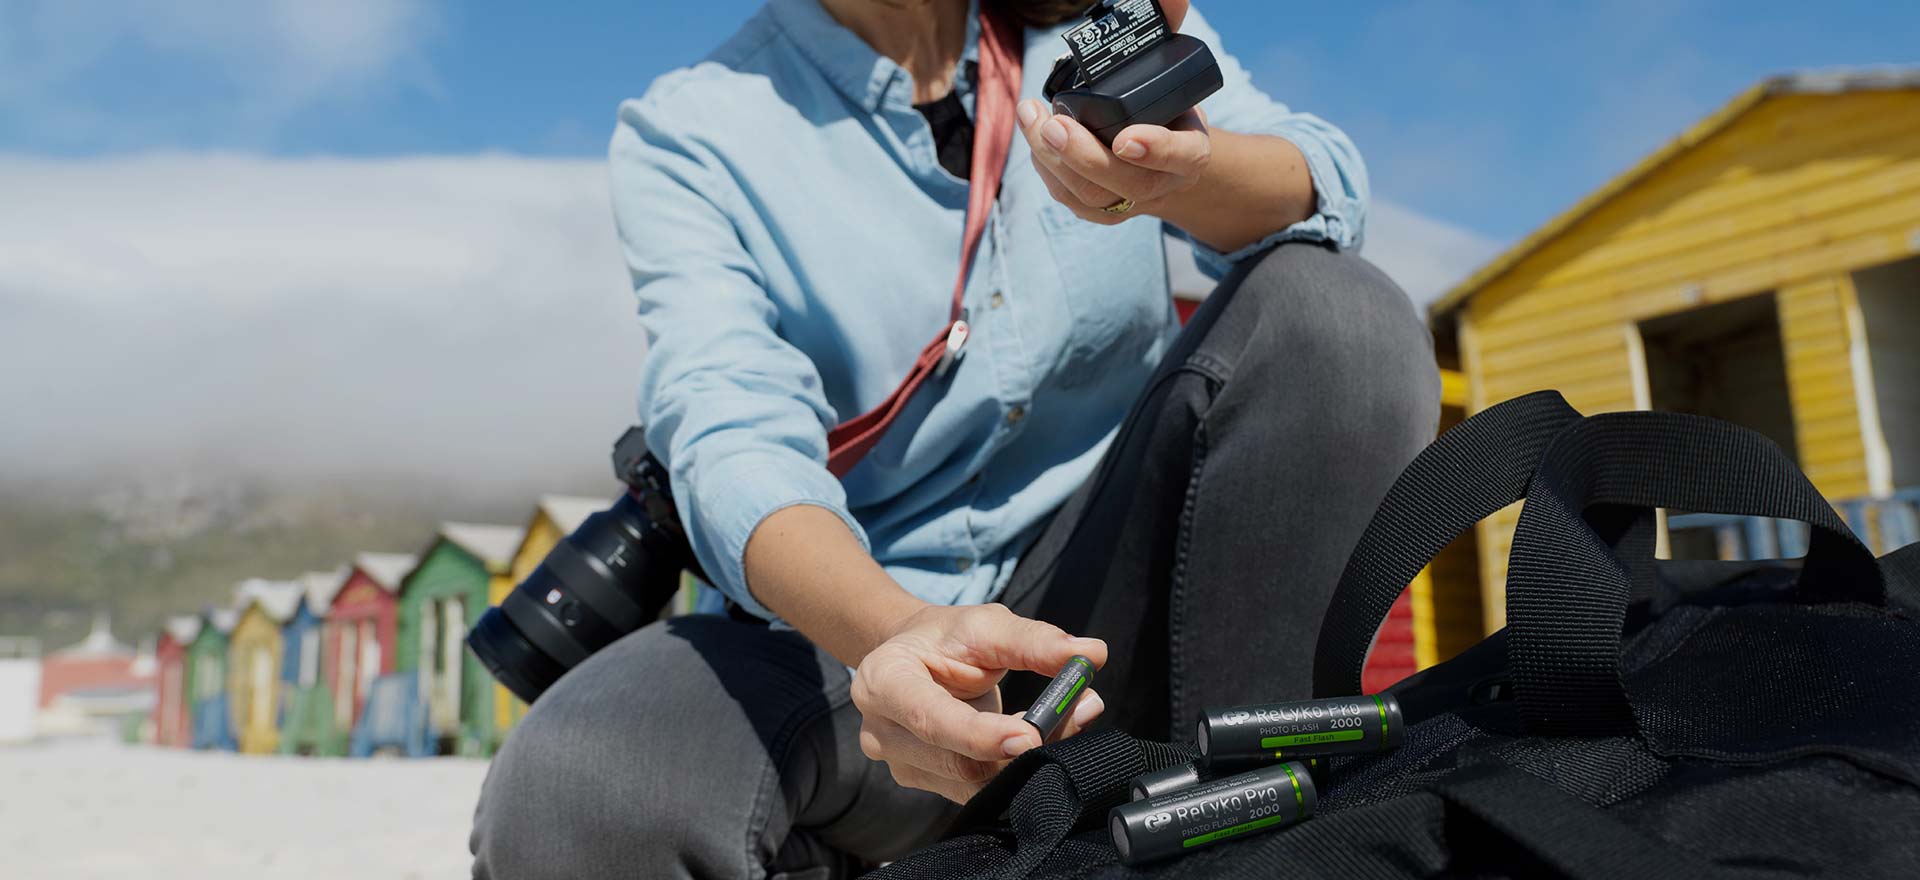 Battery guide for photographers